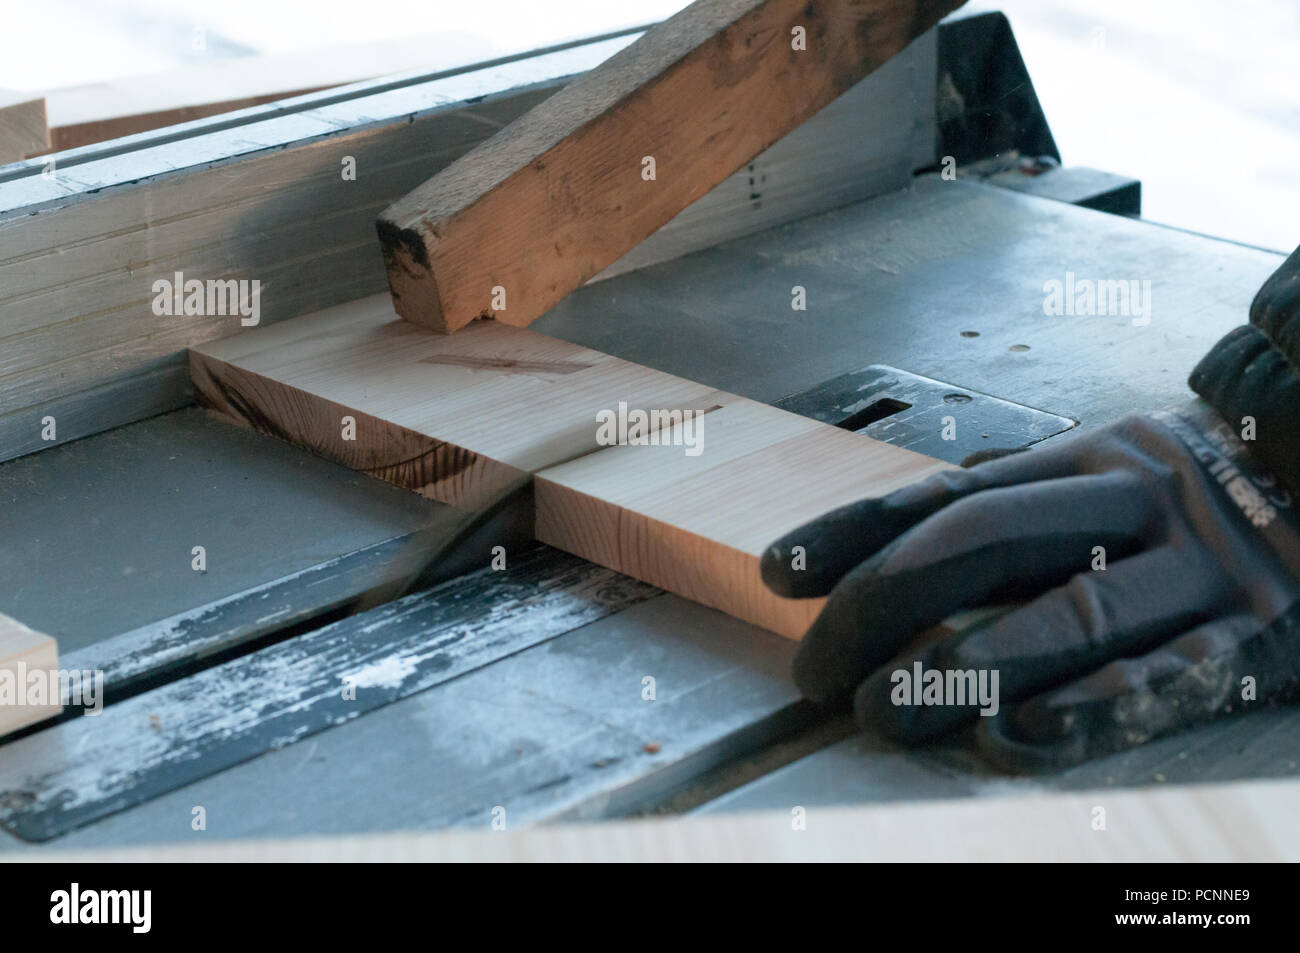 An action shot of a carpenter cutting wood using a wood cutting blade Stock Photo